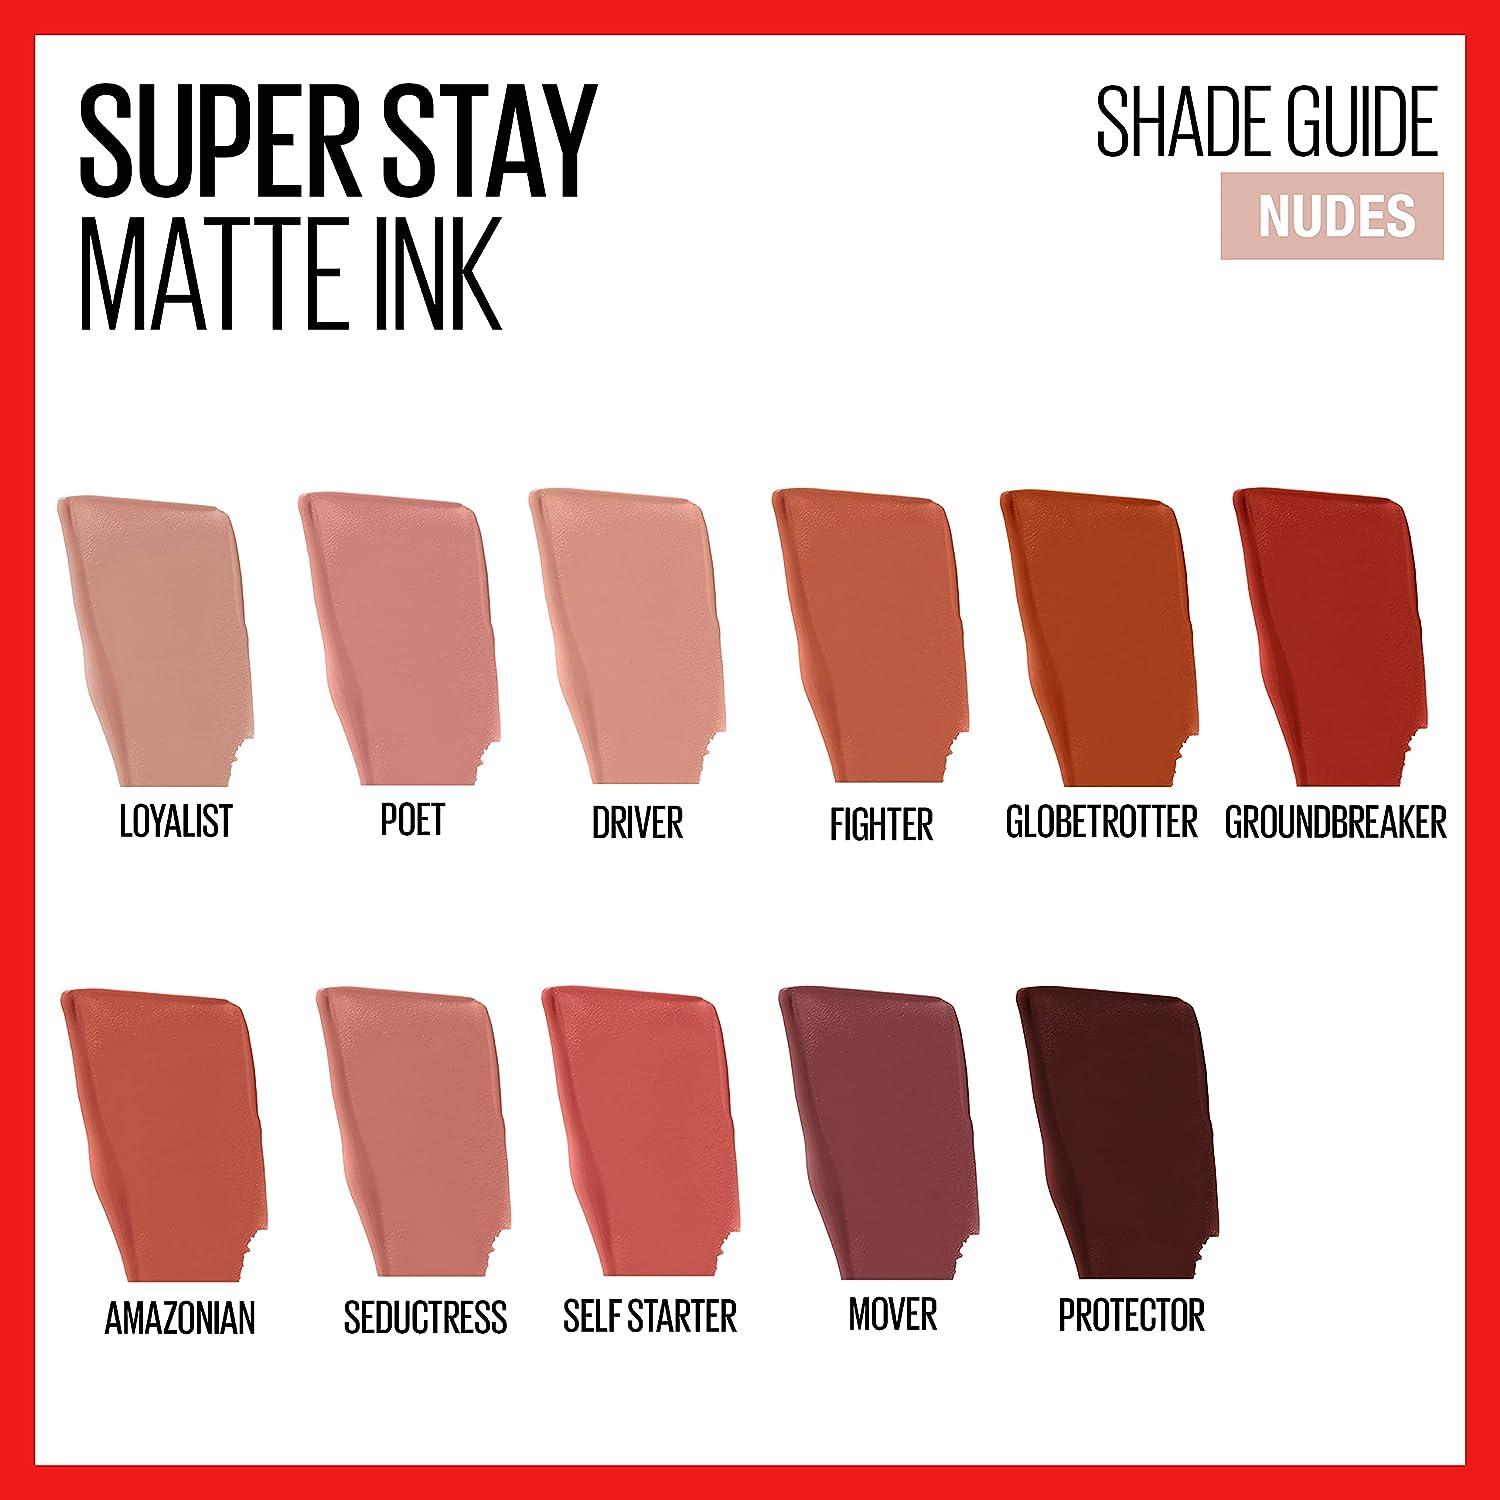 Maybelline Super Lasting Up of Lipstick Rosey 1 Wear Fl Color Nude Long 60 Light Poet 0.17 COUNT 16H Stay 1 Impact Count Makeup (Pack High Oz Ink 1) to Matte Liquid POET